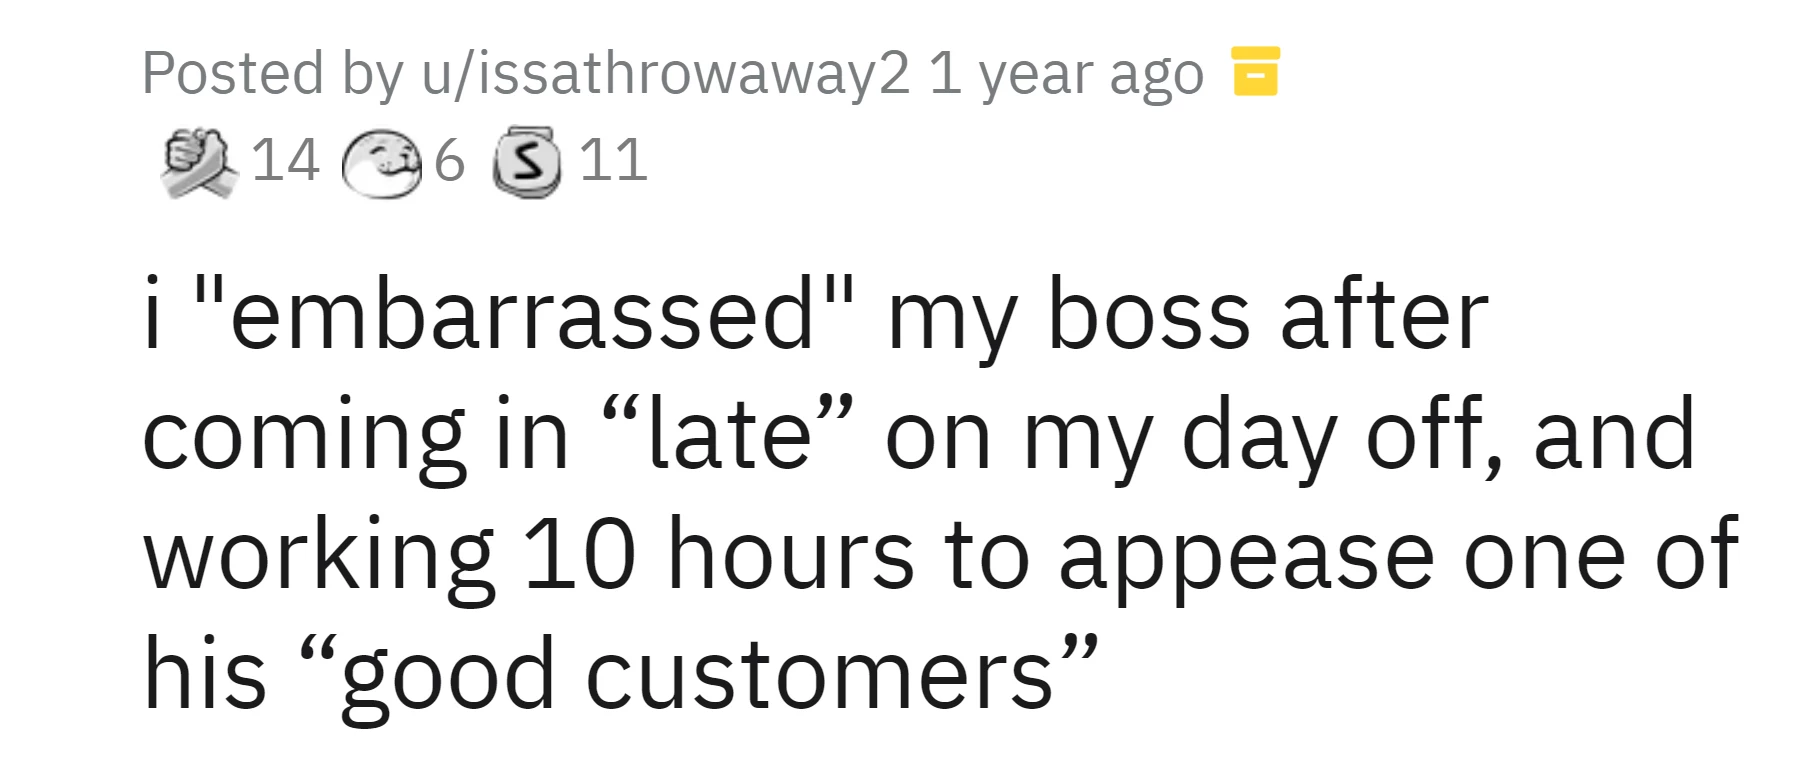 Boss Ridicules Employee After They Work For More Than 10 Hours So Employee Quits